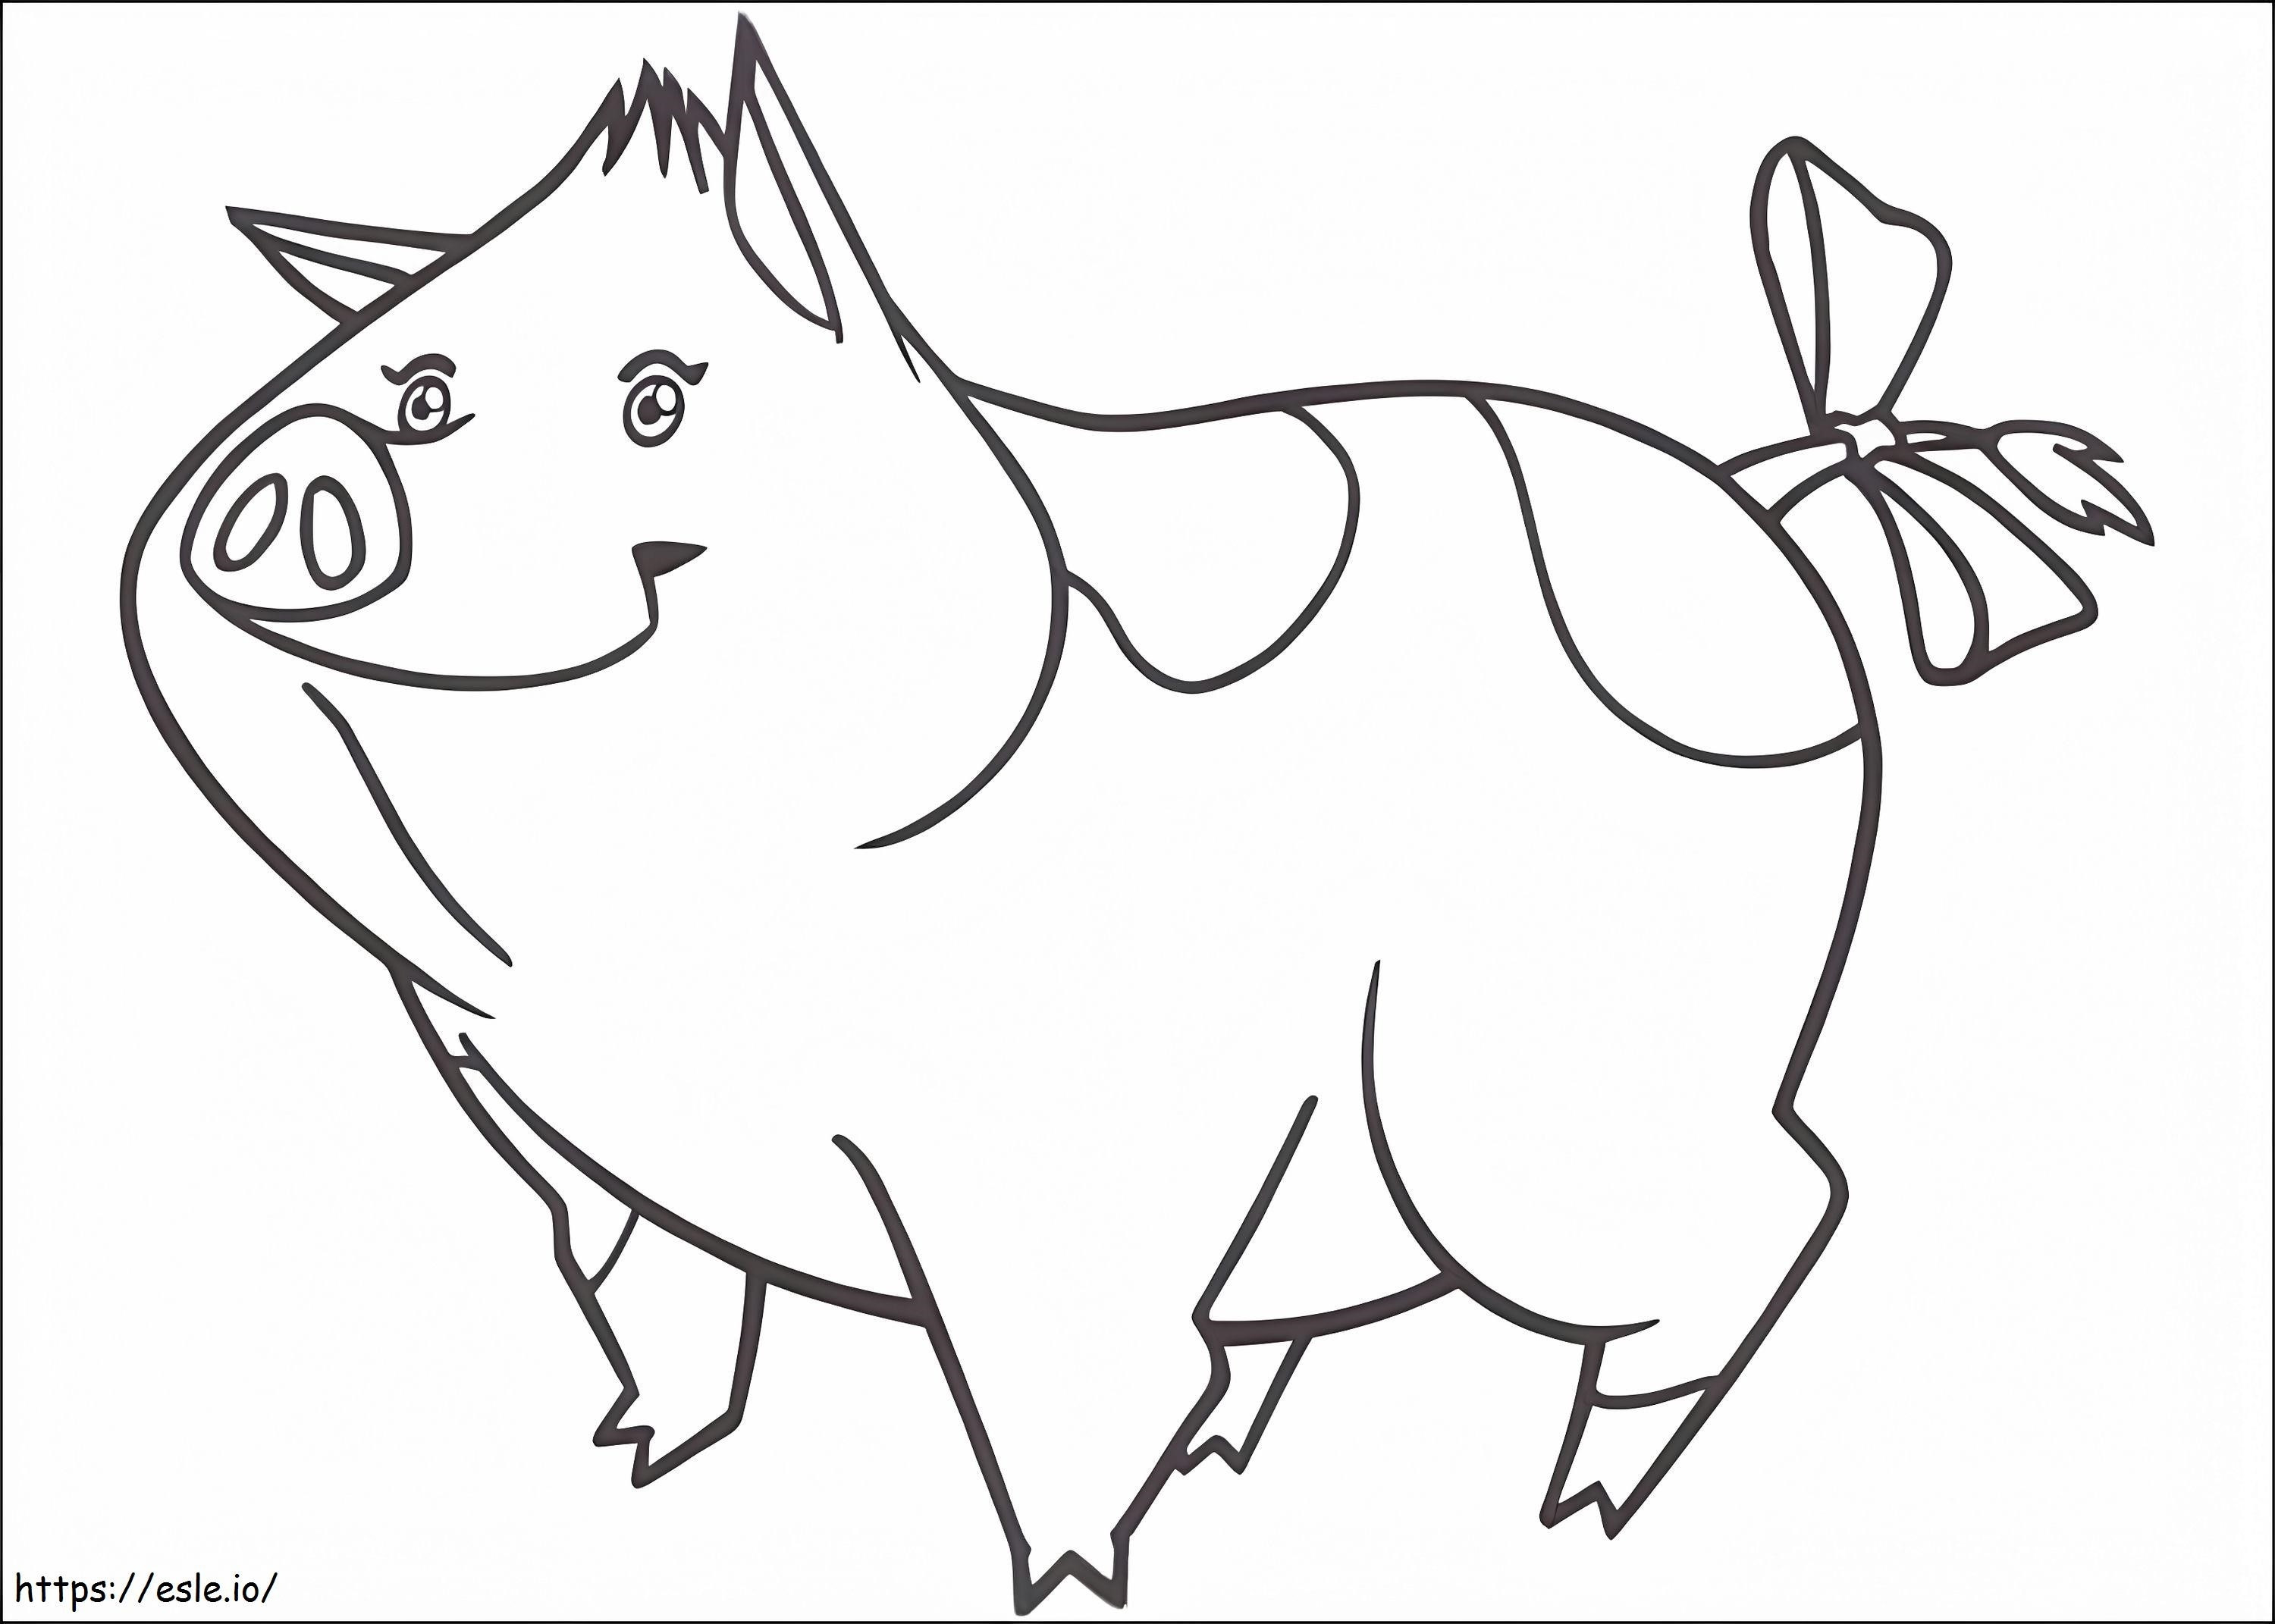 Teeny From Horseland coloring page